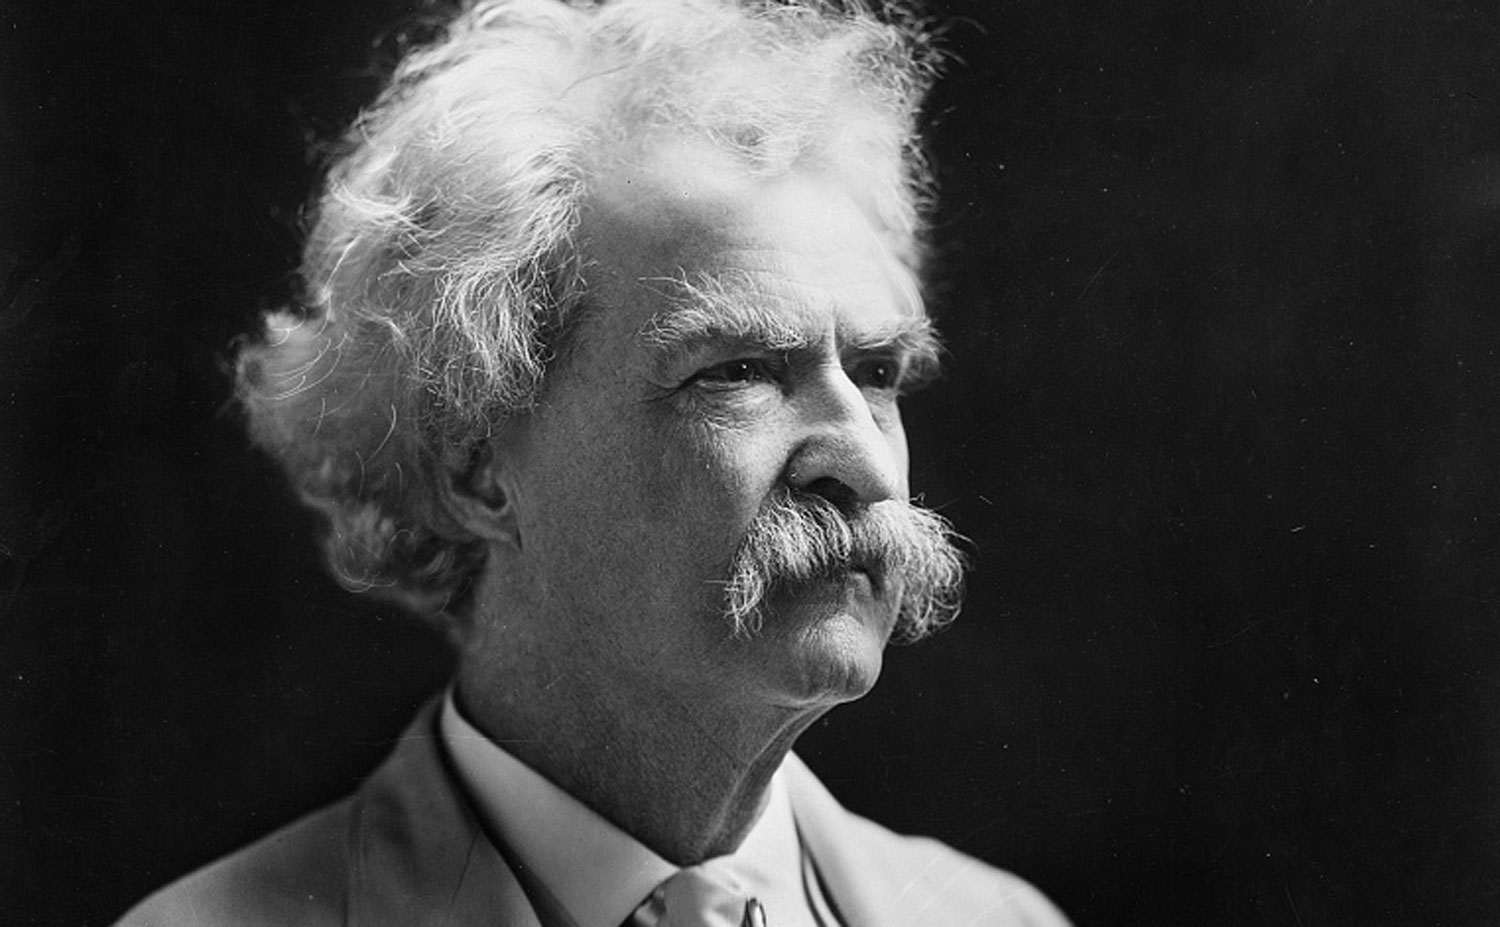 After investing huge sums on the Paige typesetting machine, Mark Twain managed to transfer all of his copyrights to his wife before declaring personal bankruptcy.